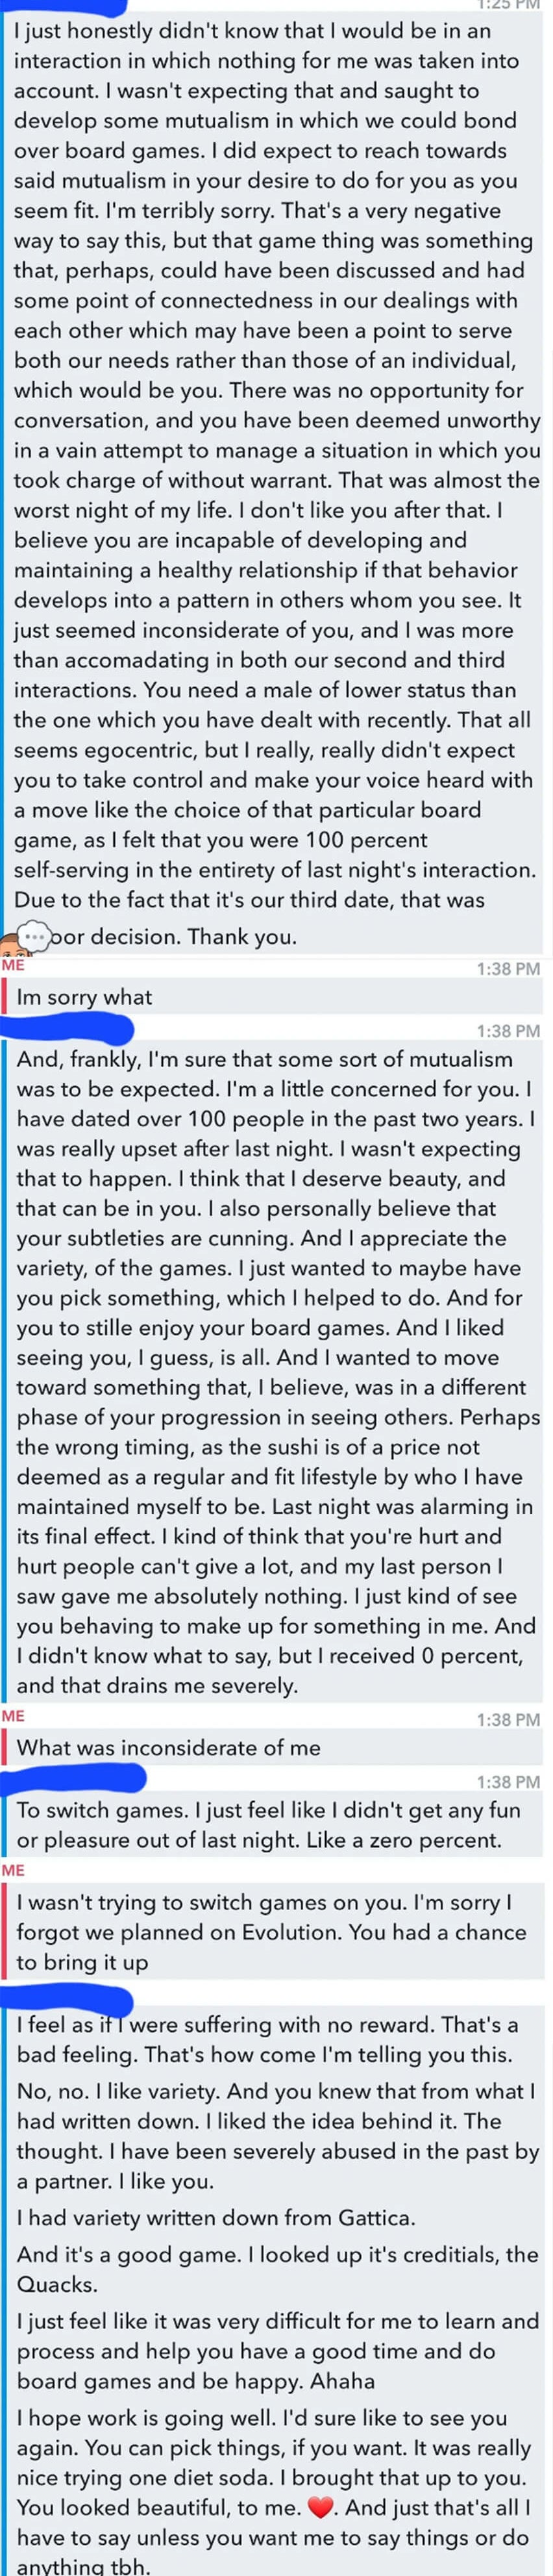 The man sends a long text about how he feels disrespected, the woman is confused, and the man specifies that he wanted to play a different game